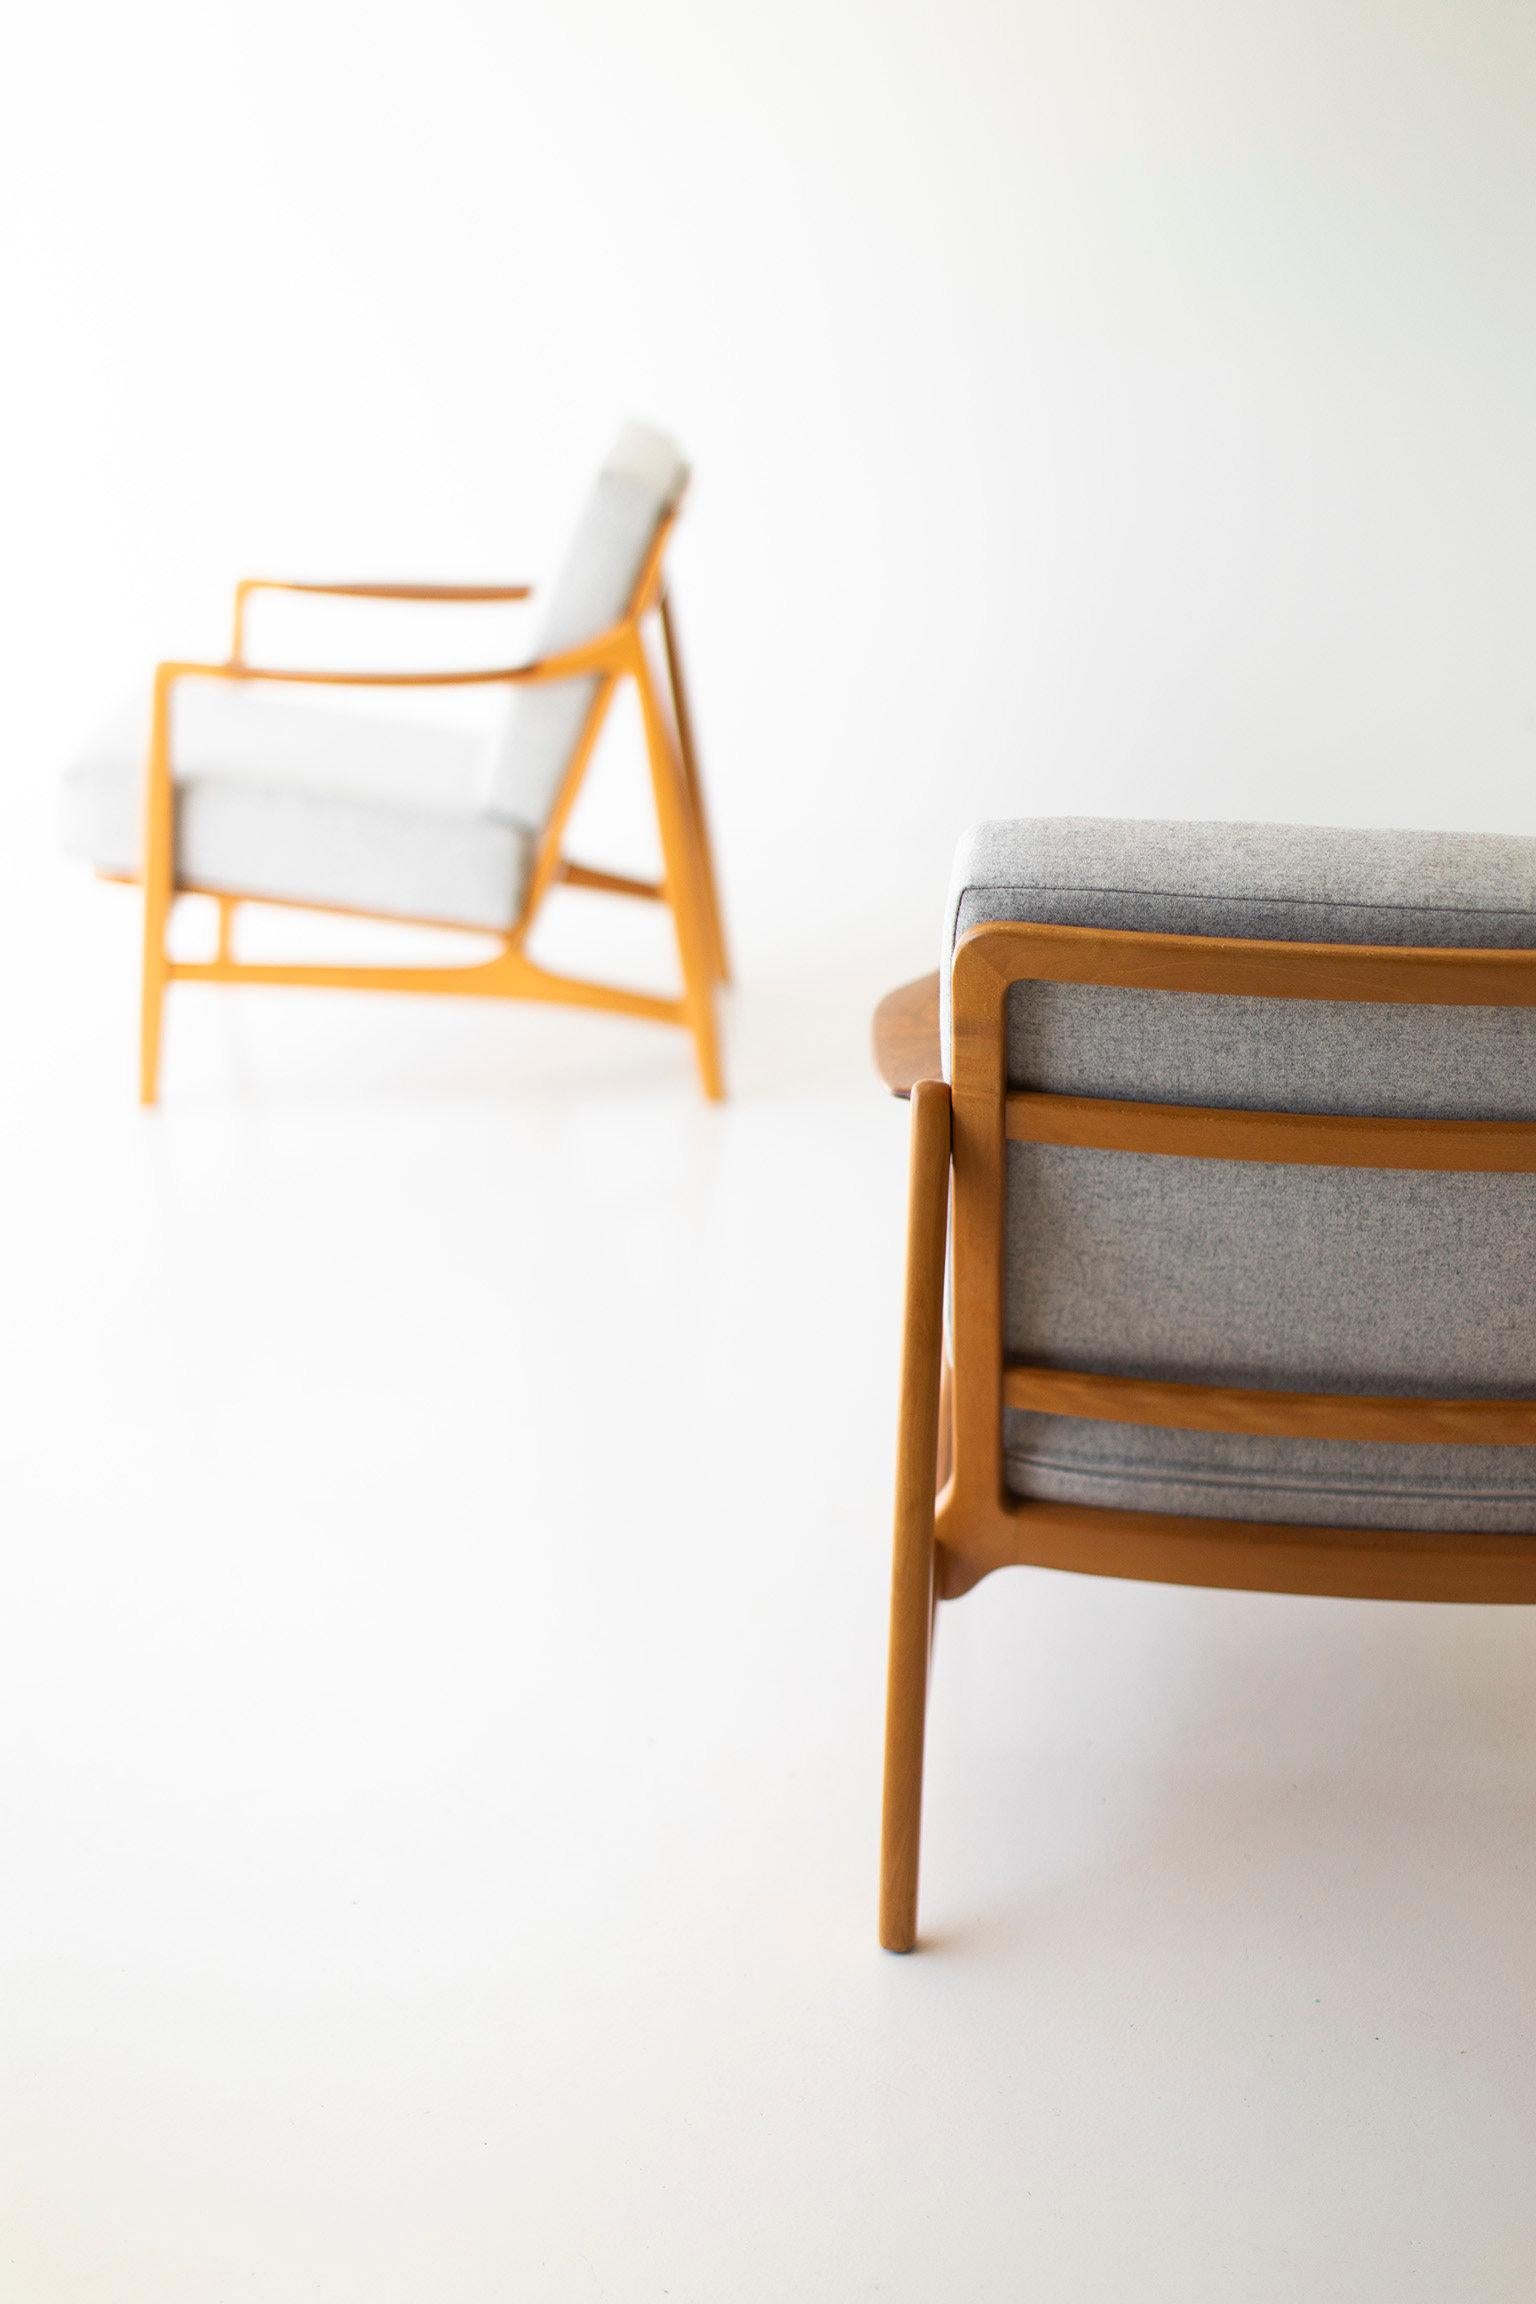 Designer: Tove & Edvard Kindt-Larsen

Manufacturer: France & Daverkosen
Period and model: Mid-Century Modern
Specs: Teak, beech, wool.

Condition:

These Tove & Edvard Kindt-Larsen lounge chairs for France & Daverkosen are in excellent